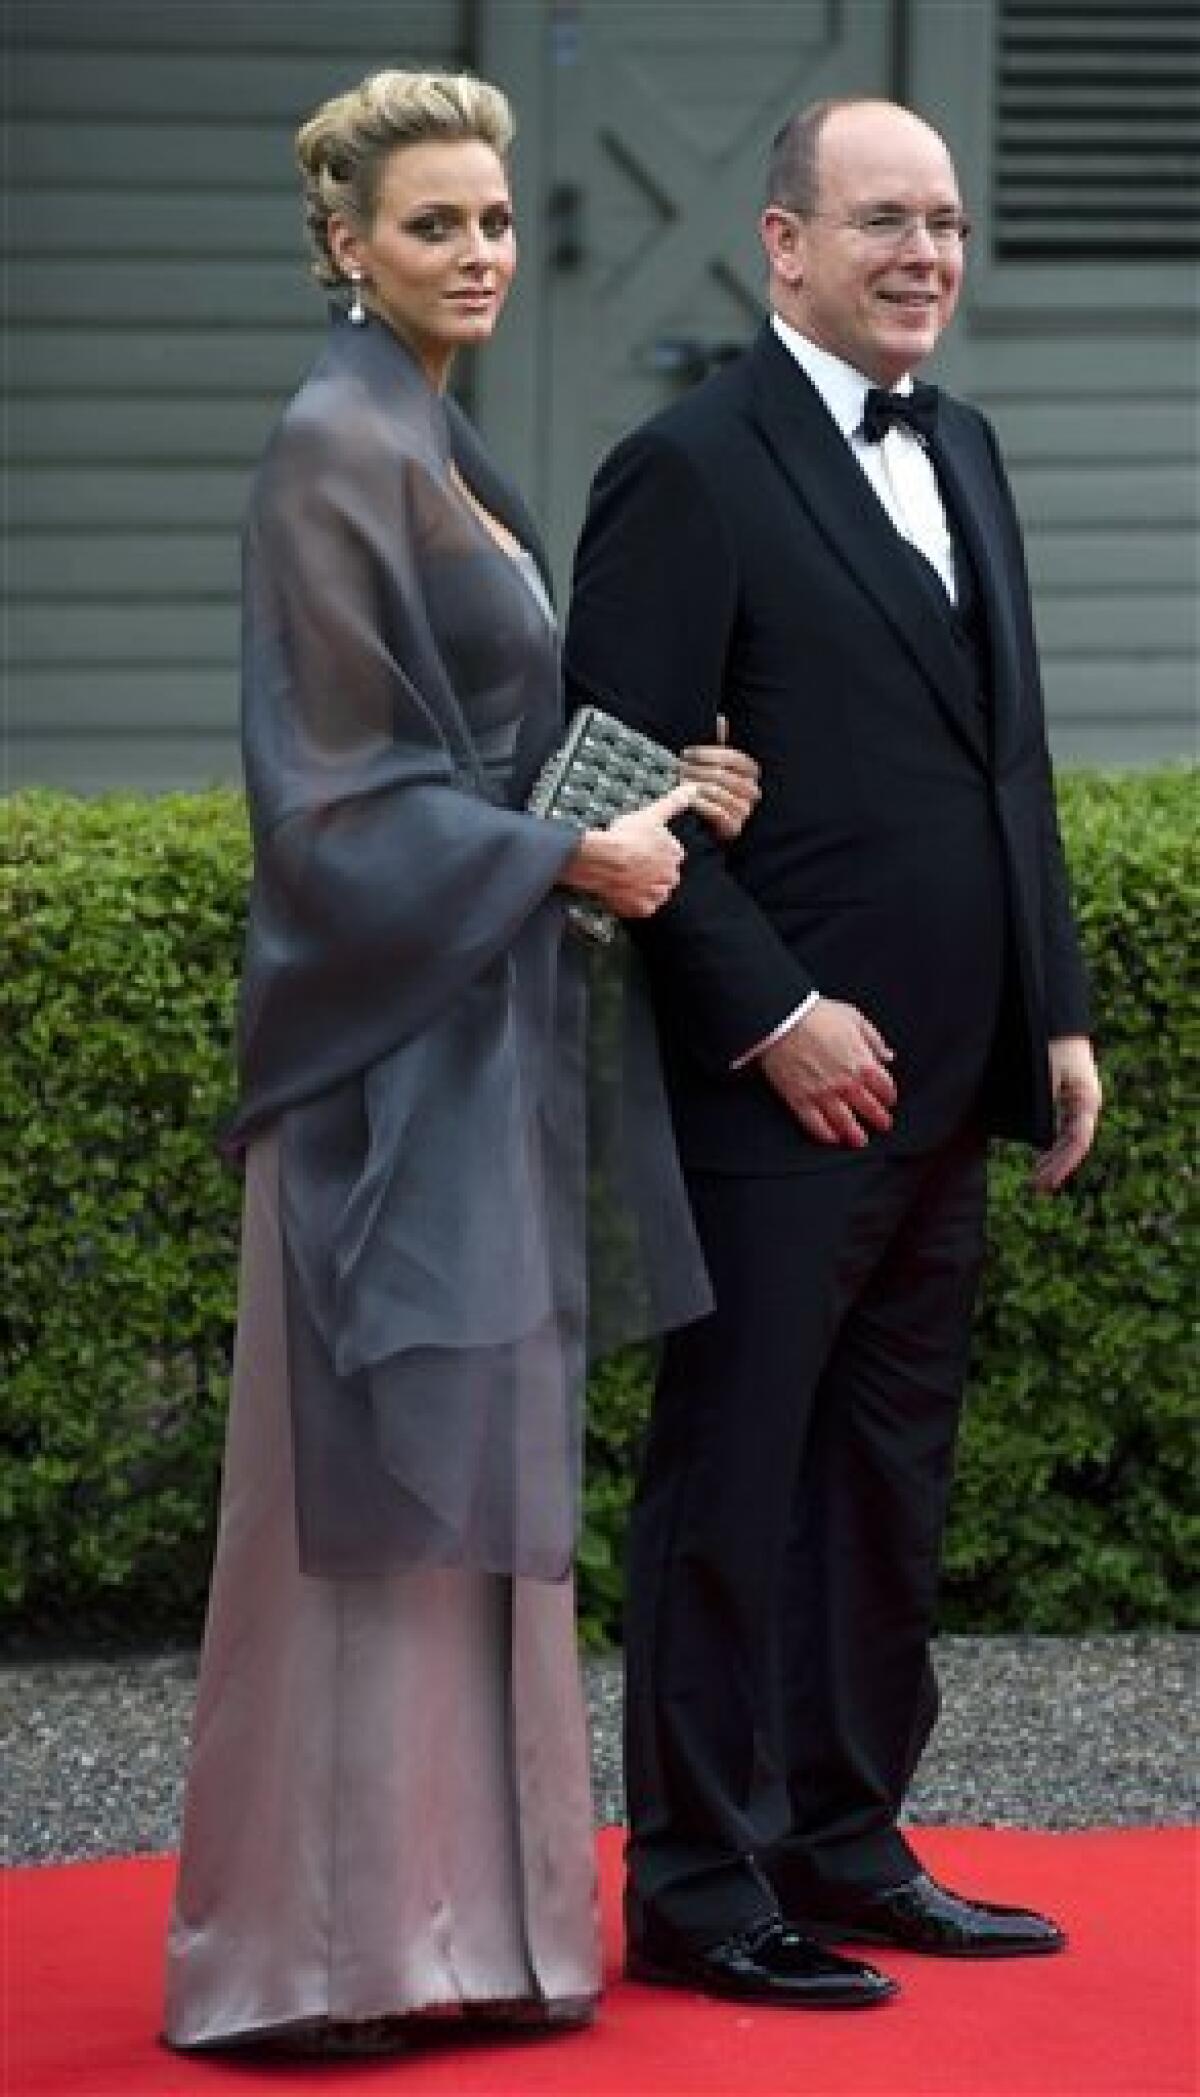 Prince Albert of Monaco, right and Charlene Wittstock arrive at the Swedish Government's dinner at the Eric Ericson Hall in Stockholm, Sweden, Friday, June 18, 2010. Crown Princess Victoria will marry Daniel Westling on Saturday, June 19. (AP Photo/Claudio Bresciani, Scanpix)